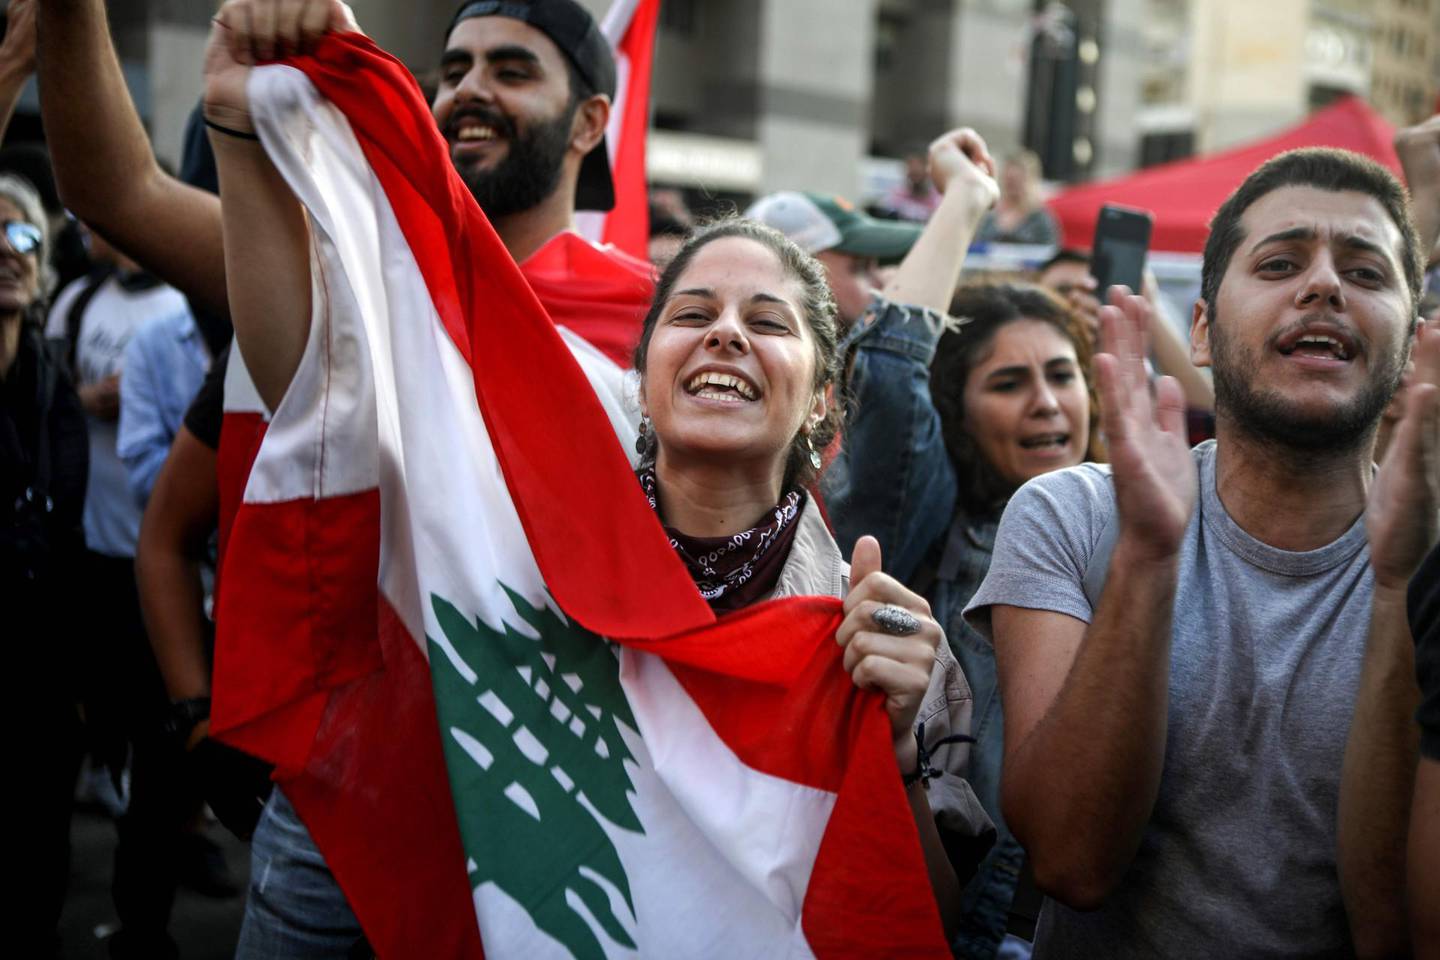 Lebanese anti-government protesters celebrate the resignation of Prime Minister Saad Hariri in Beirut on October 29, 2019 on the 13th day of anti-government protests. / AFP / Patrick BAZ
